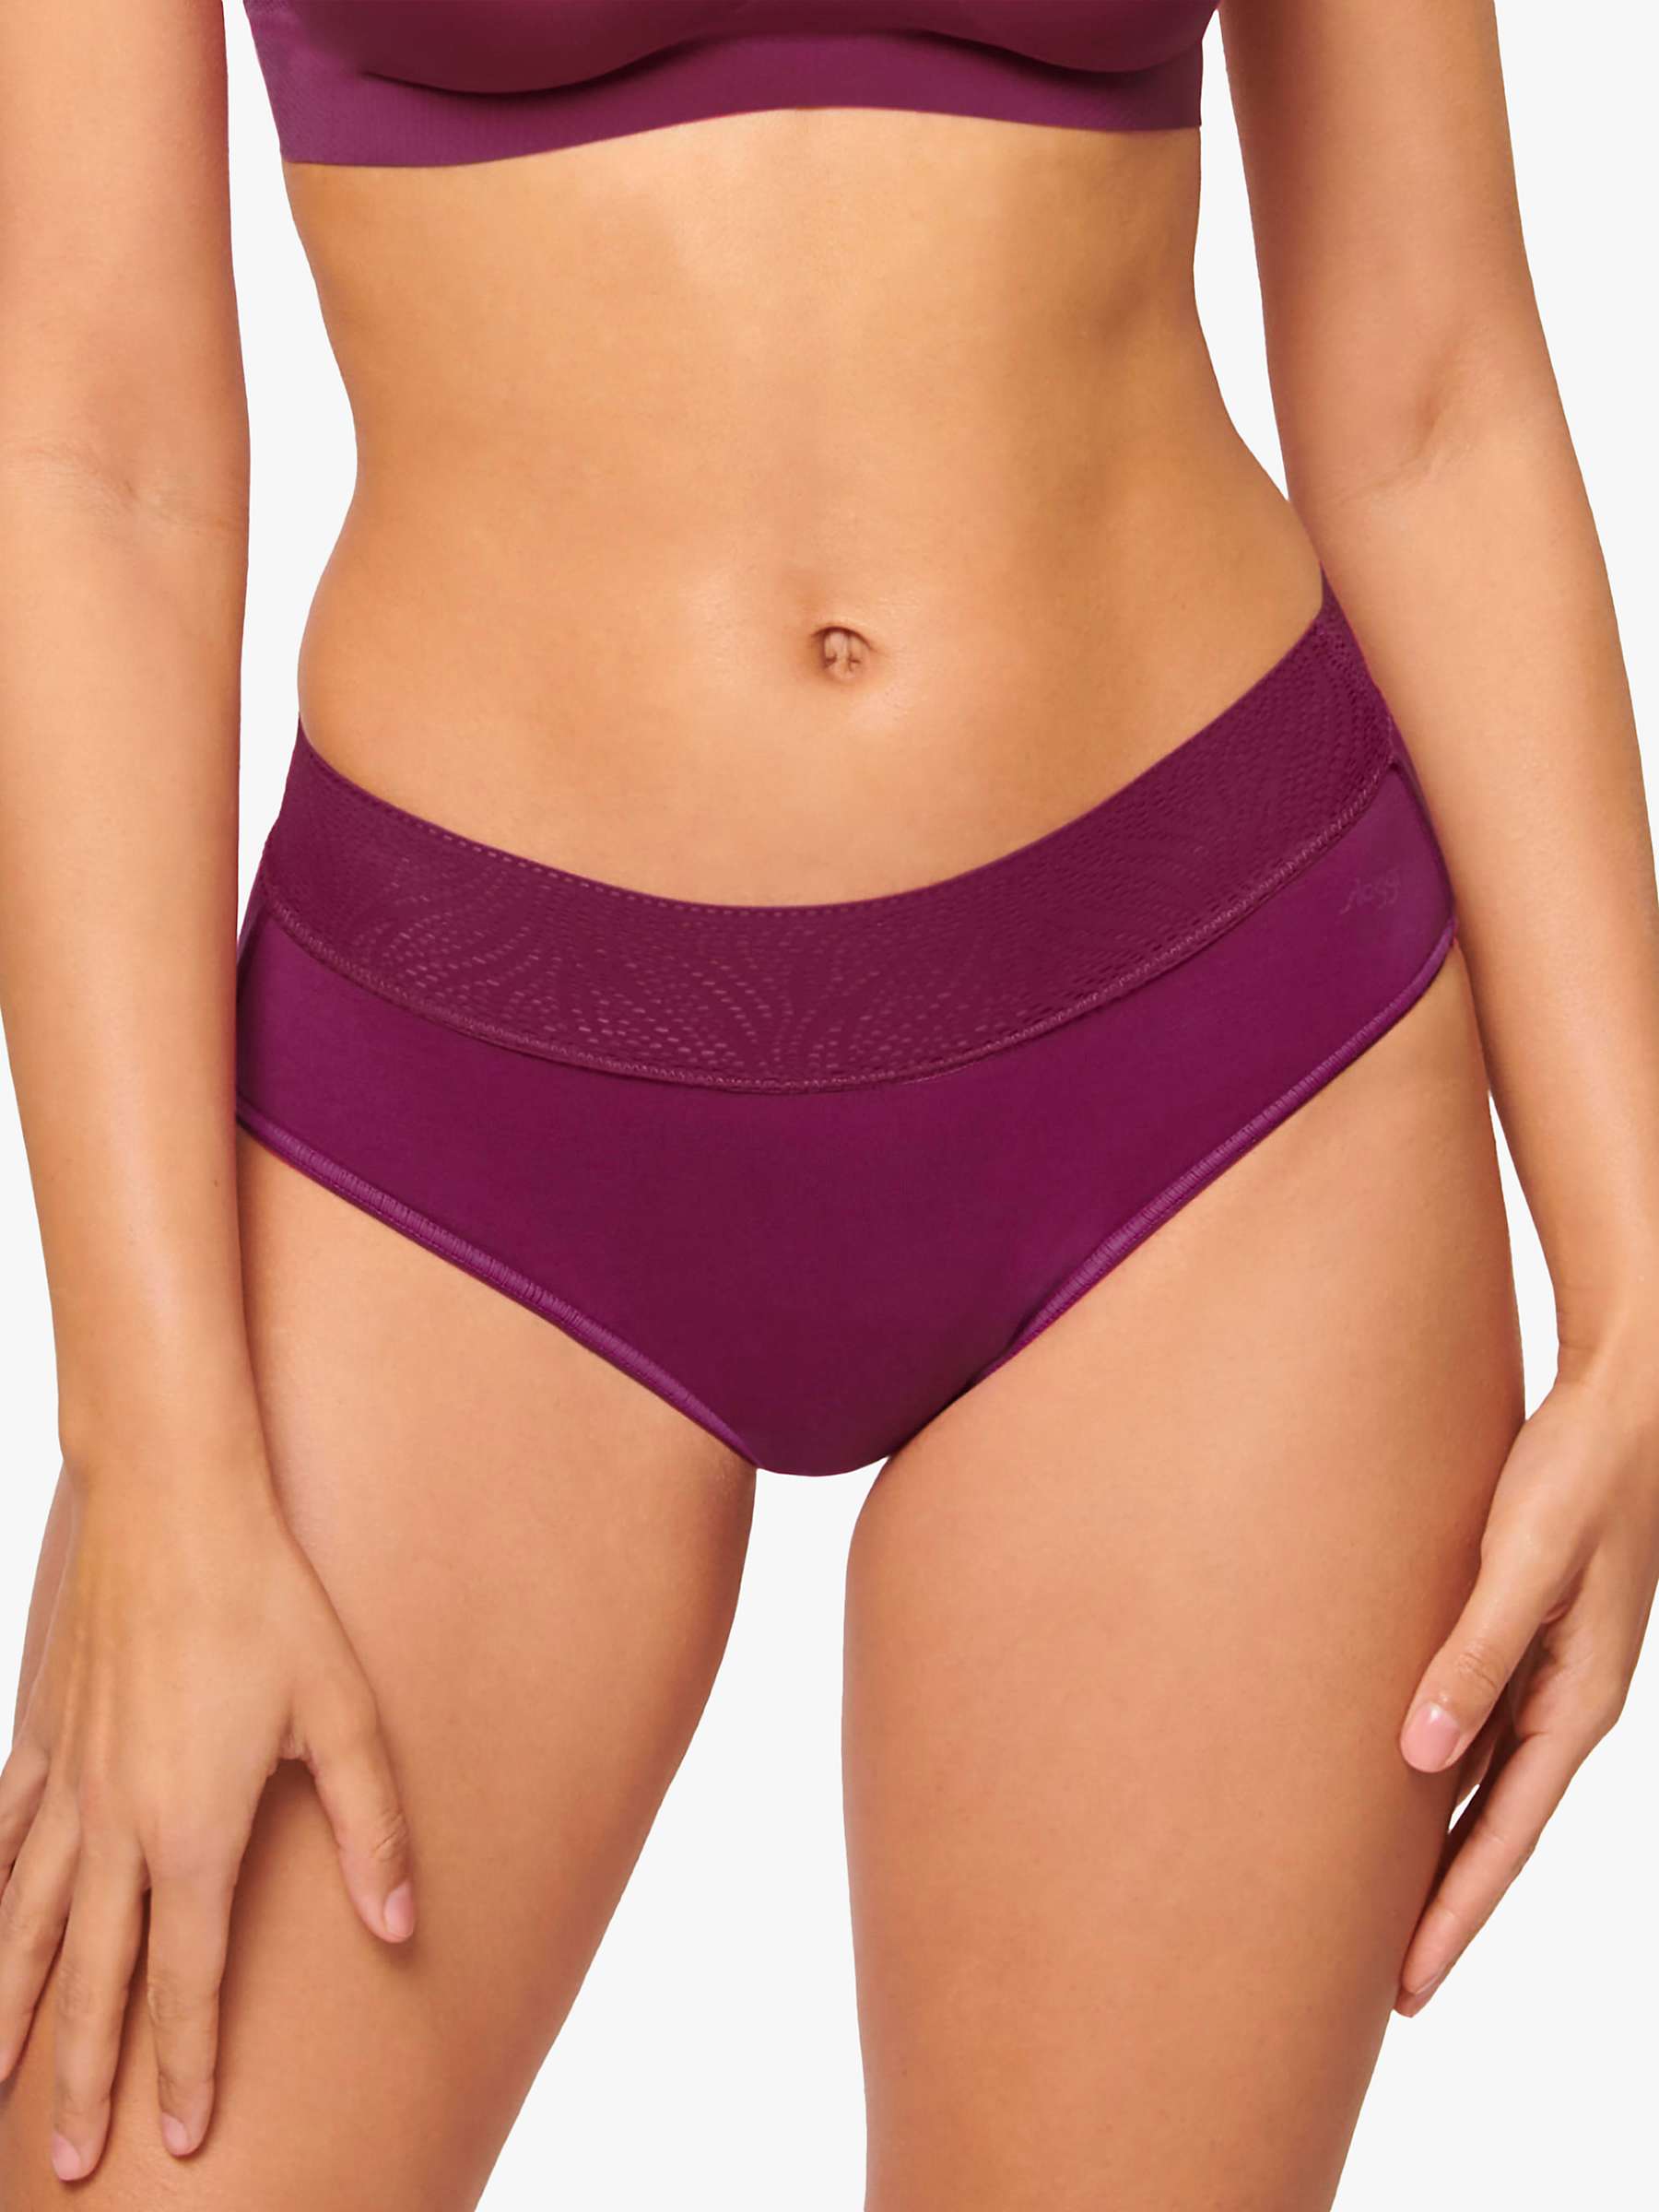 Buy sloggi Medium Absorbency Hipster Period Knickers, Pack of 2 Online at johnlewis.com